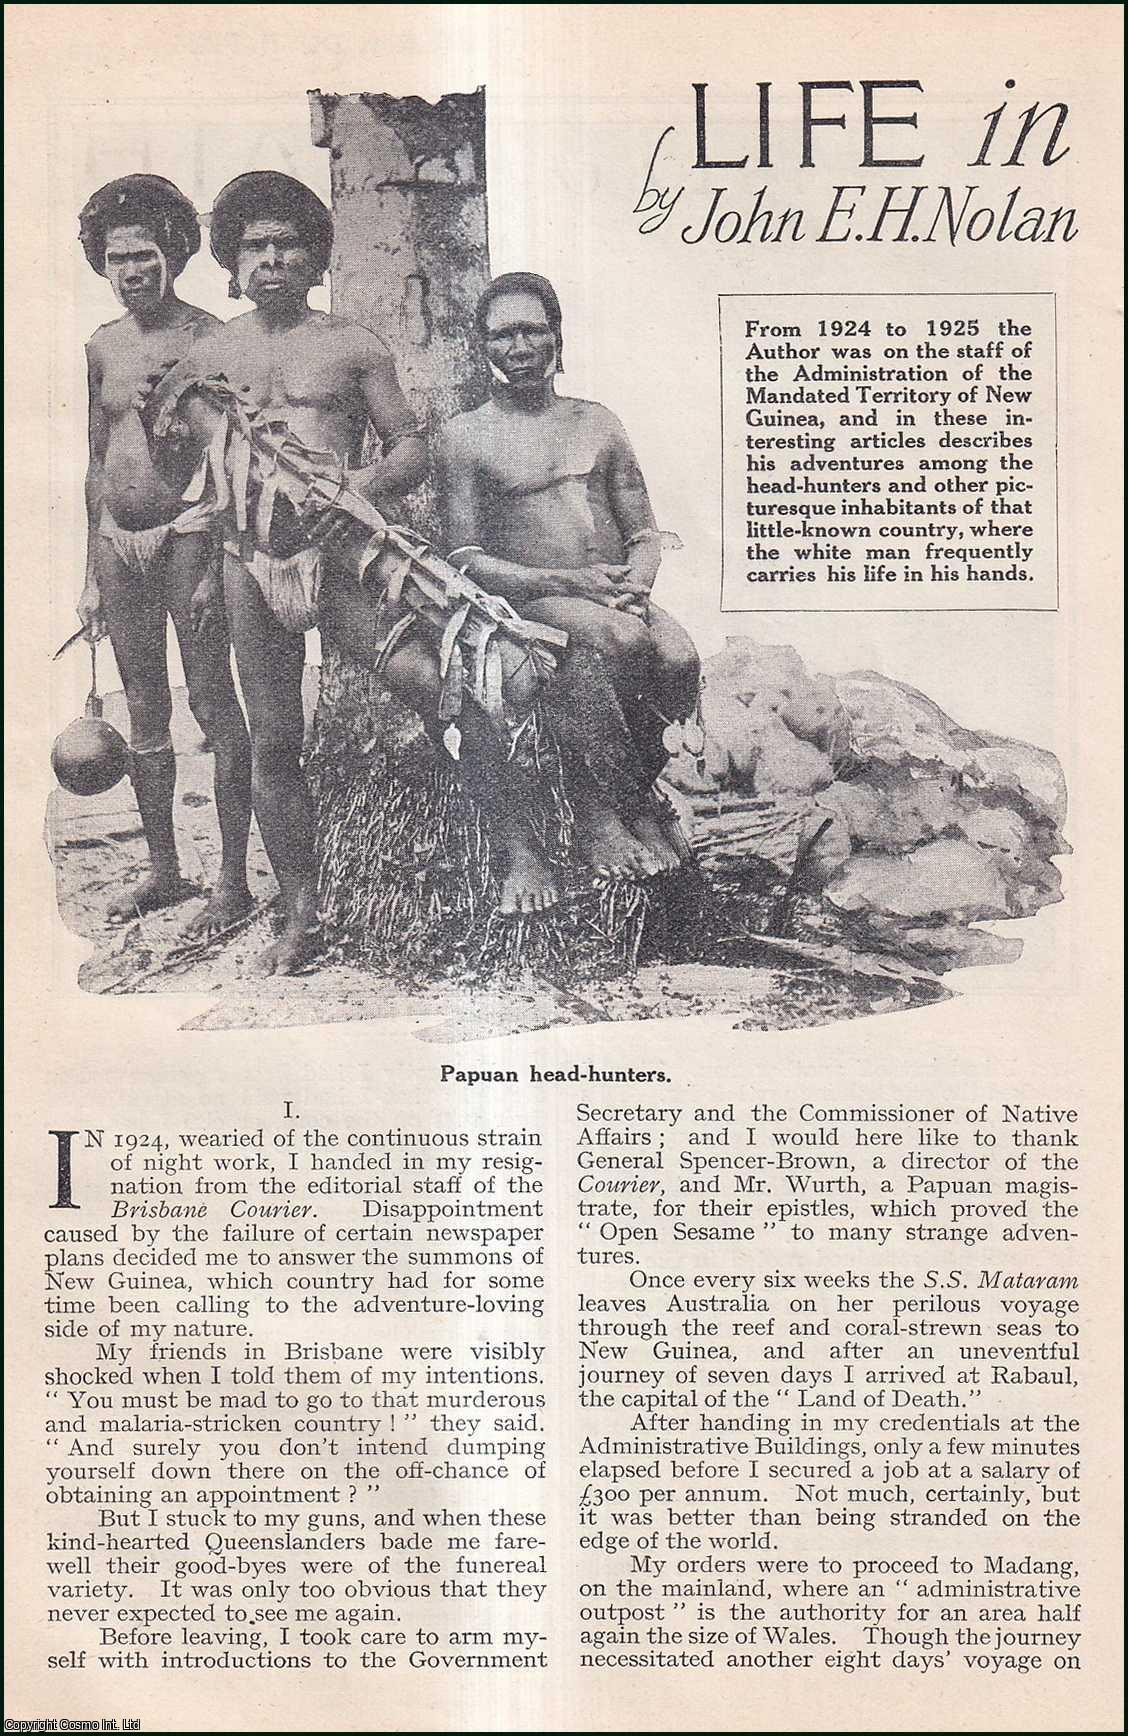 John E.H. Nolan, Late Clerk of Native Affairs, Madang, New Guinea. - Life in a Land of Death : head-hunters. The Mandated Territory of New Guinea. A complete 2 part uncommon original article from the Wide World Magazine, 1928.